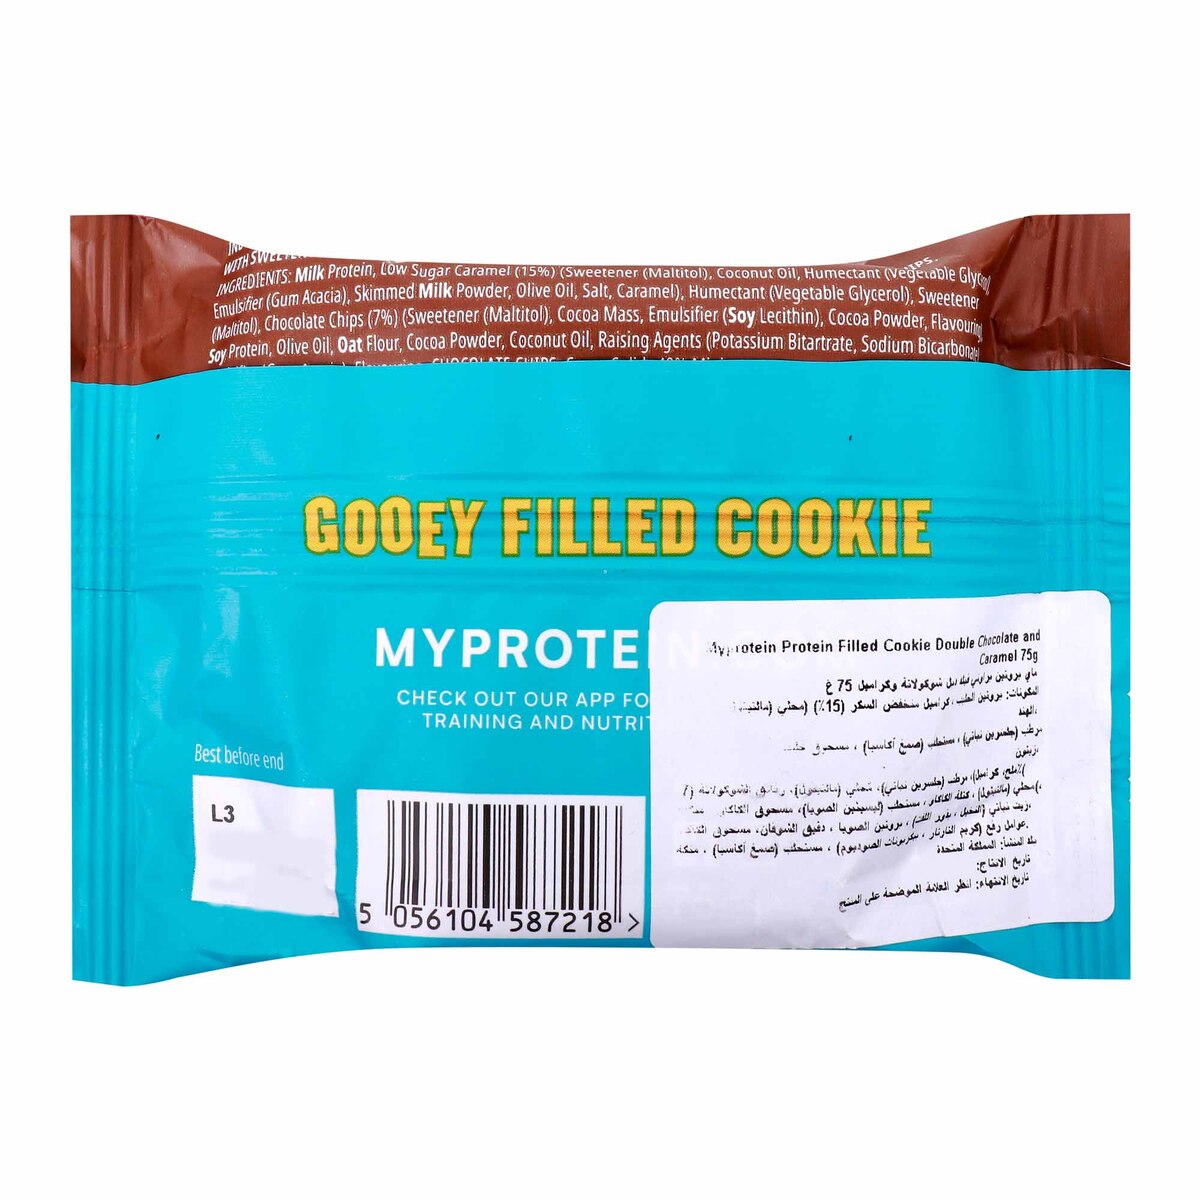 My Protein Gooey Filled Cookie, Double Choc & Caramel, 75 g